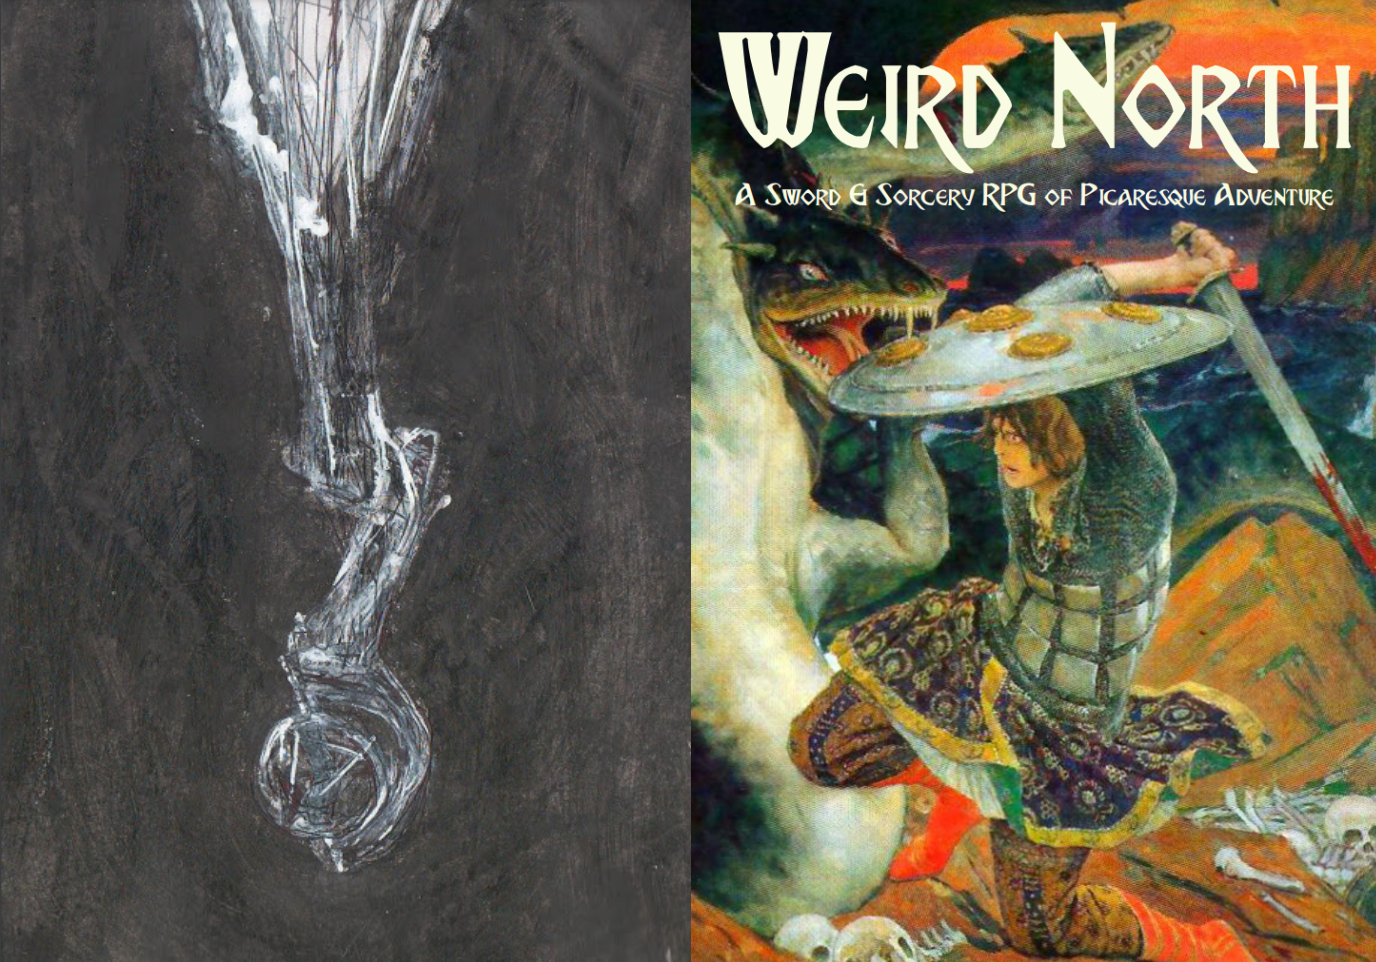 Covers of Deep Carbon Observatory and Weird North